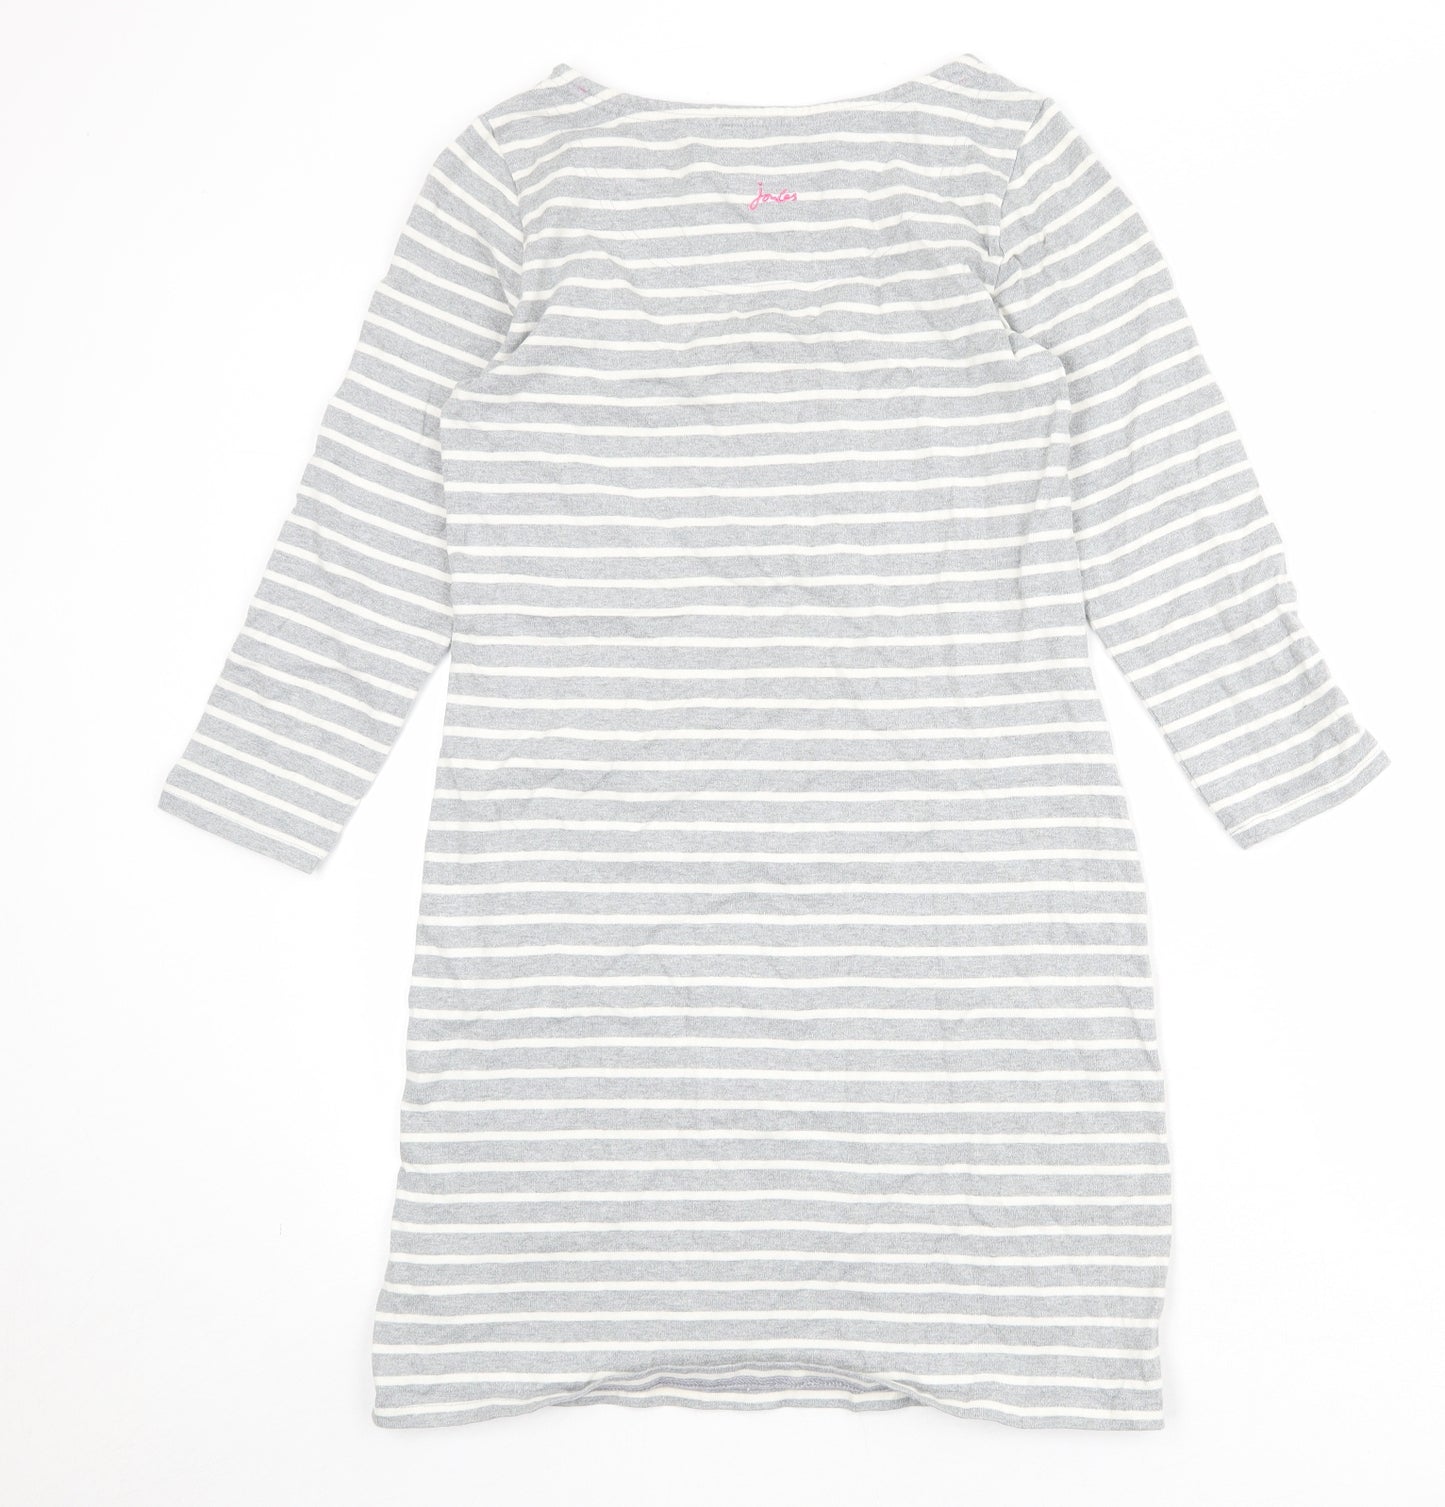 Joules Womens Grey Striped 100% Cotton T-Shirt Dress Size 10 Boat Neck Pullover